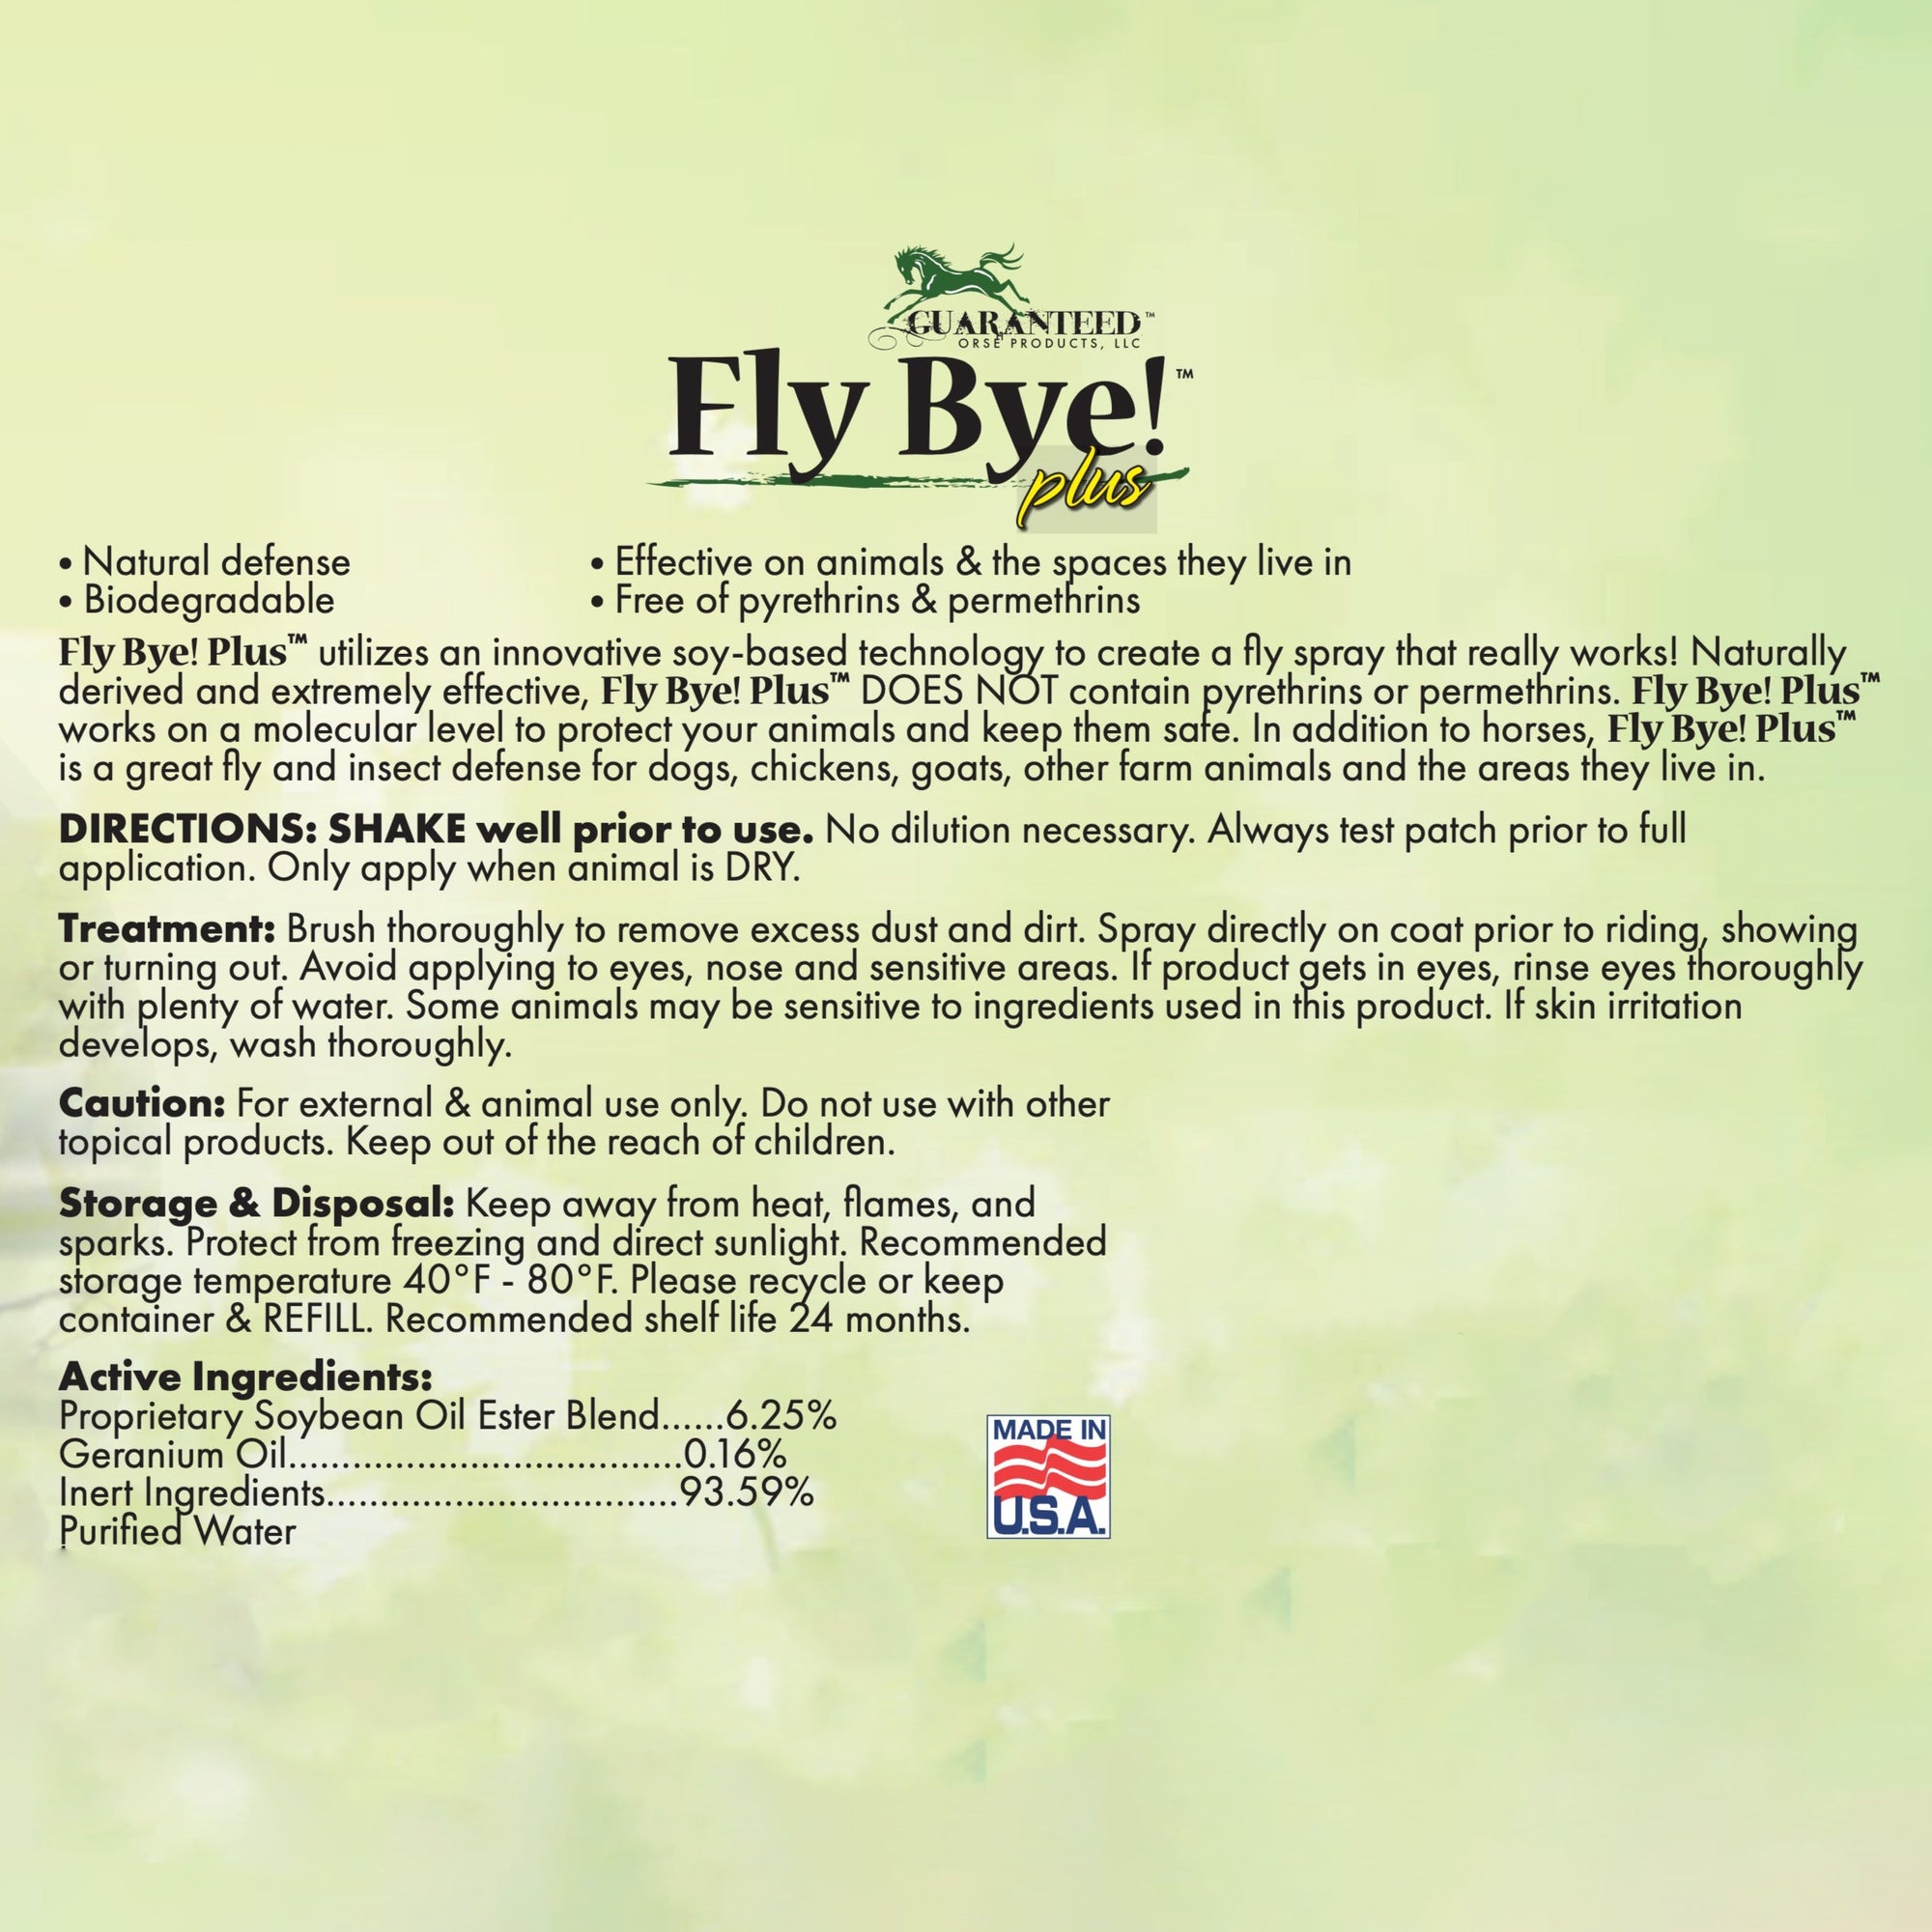 Fly Bye! Plus natural fly repellent ingredients and instructions